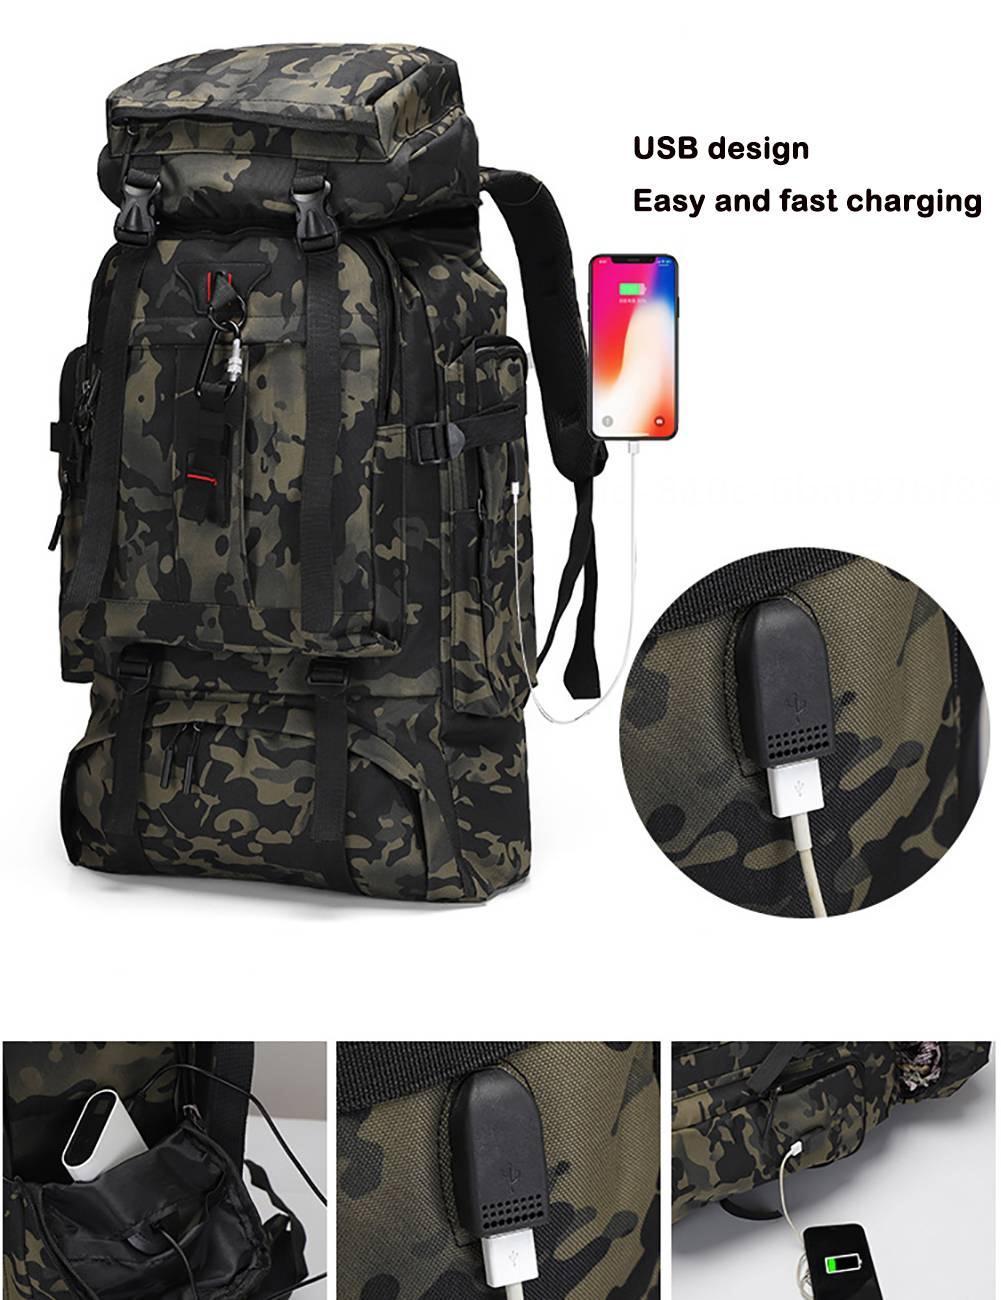 Hiking Backpack - 80l Hiking Backpack with Rainproof Travel Backpack, Waterproof Travel Backpack, Men and Women Travel Hiking Mountaineering,D - image 2 of 8